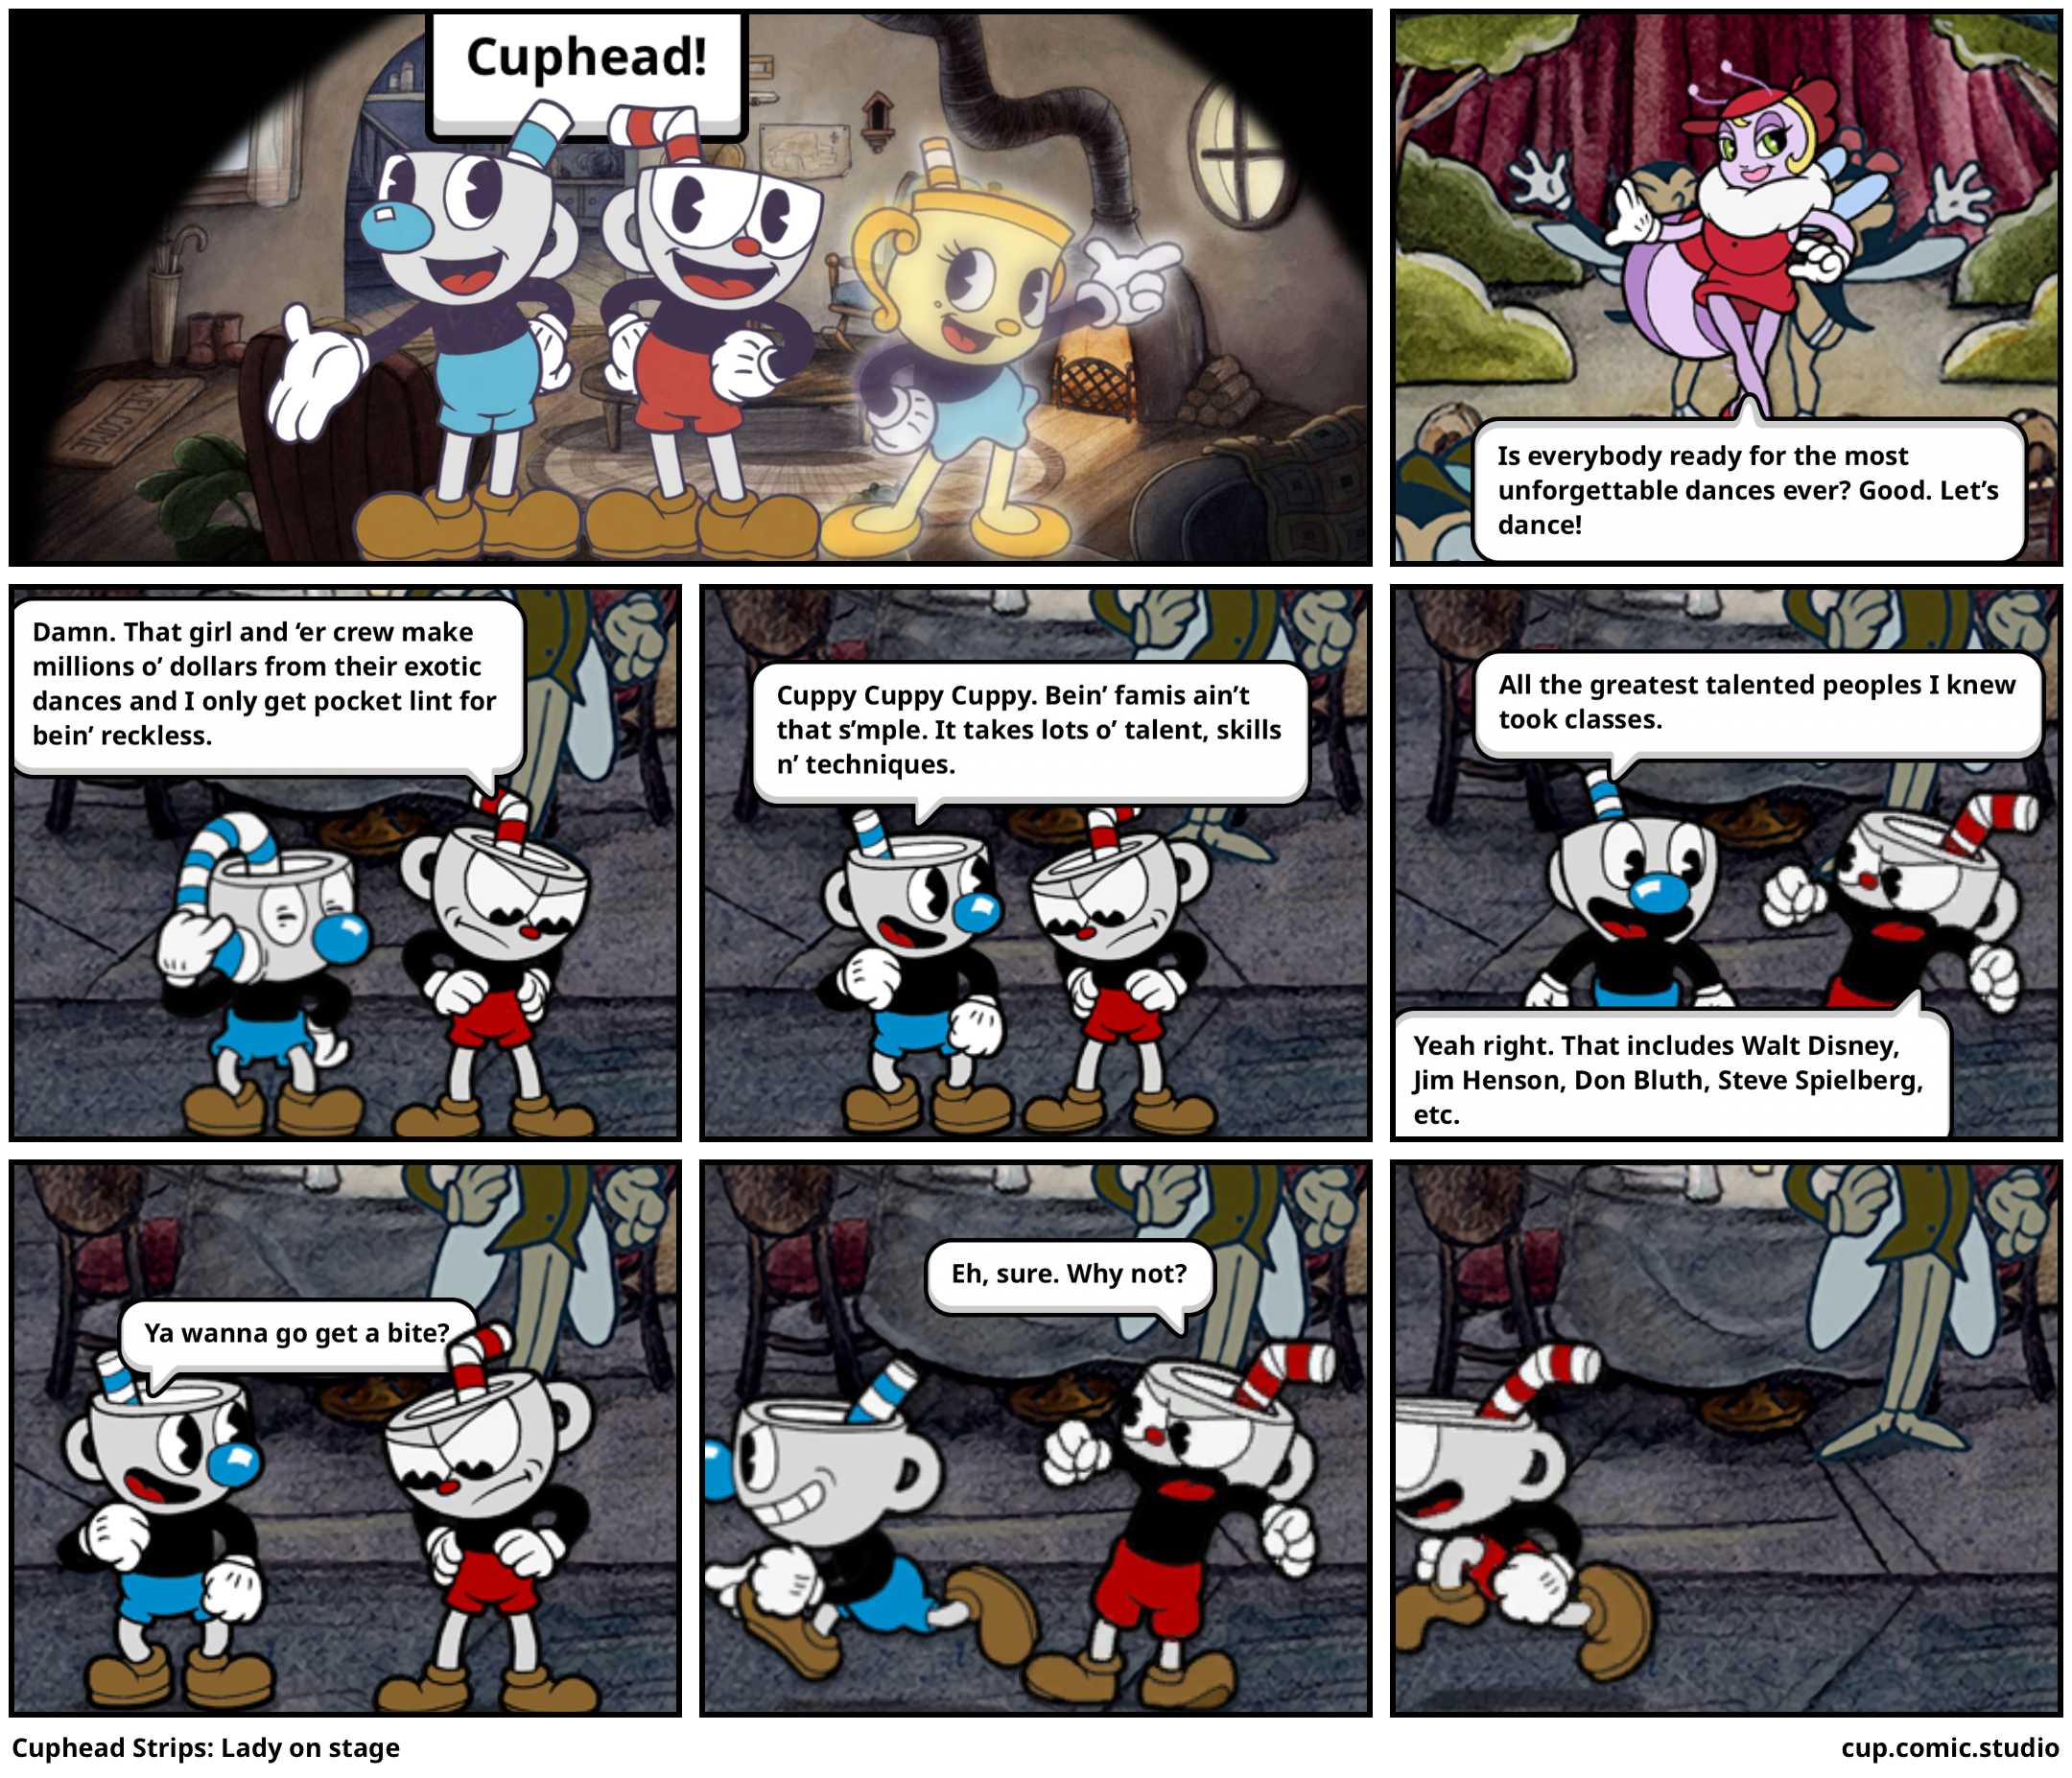 Cuphead Strips: Lady on stage